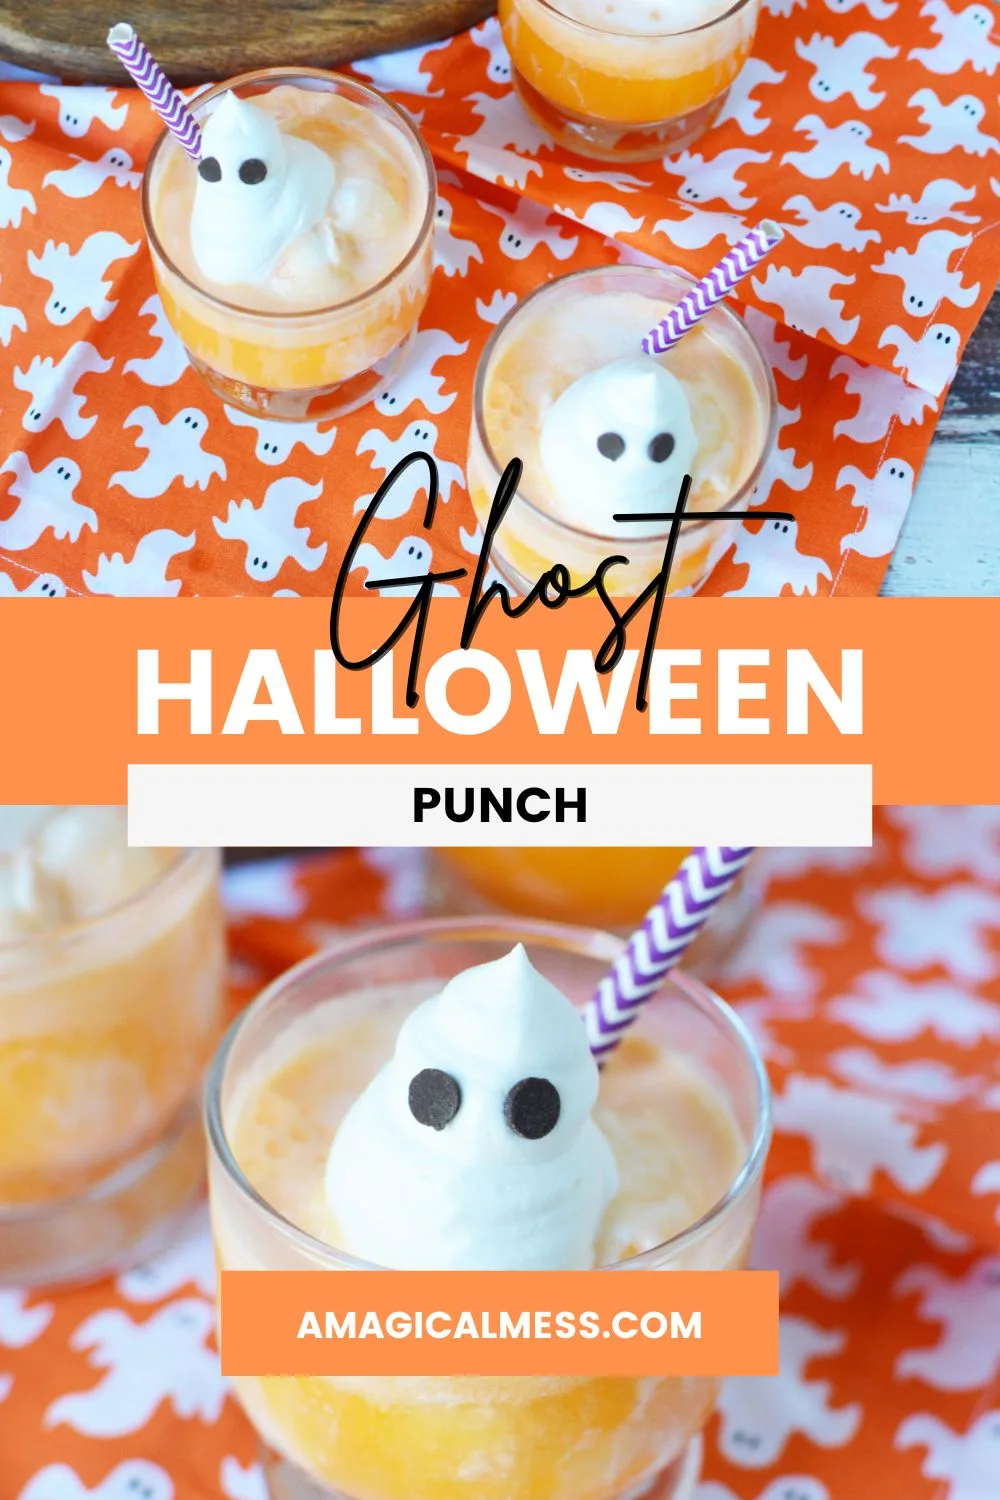 Cups with orange punch topped with spooky ghosts for Halloween.